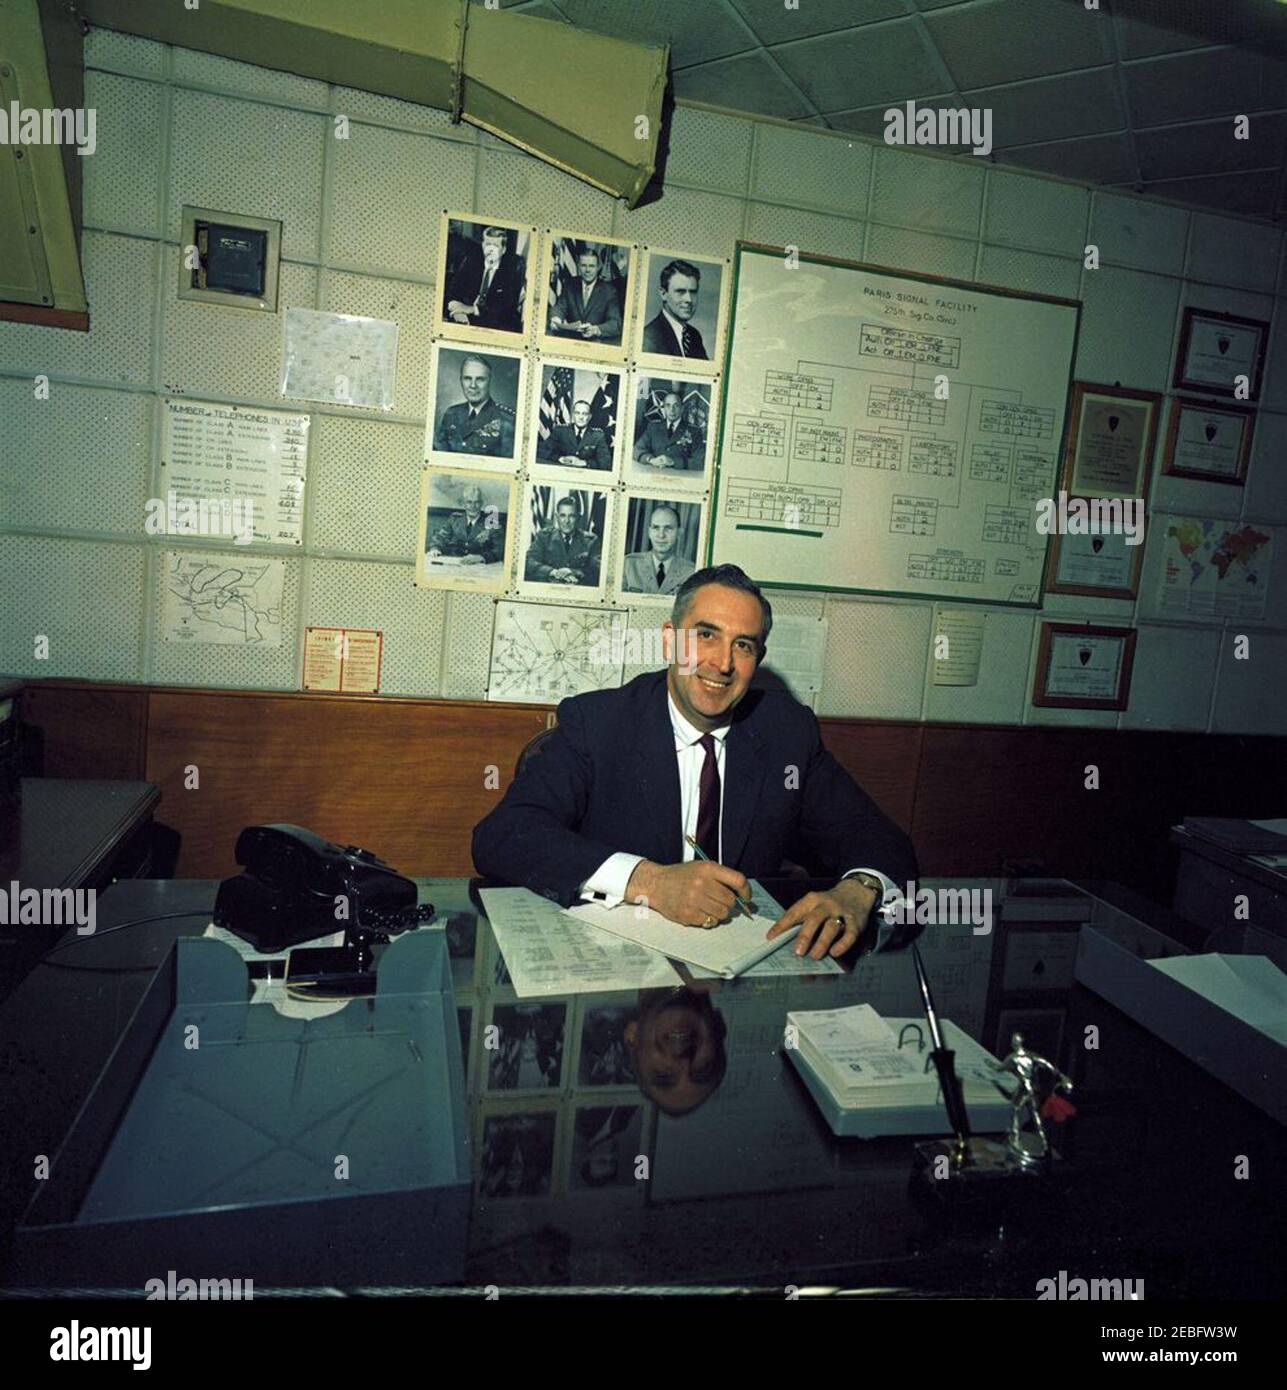 White House Army Signal Agency (WHASA) advance trip to Paris, France. White House Army Signal Agency (WHASA) advance trip to Paris. Unidentified man sitting at desk. Poster on wall reads: u201cParis Signal Facility, 275th Sig. Co. (Svc.),u201d with a grid of staff assignments listed below. Unidentified building, Paris, France. Stock Photo